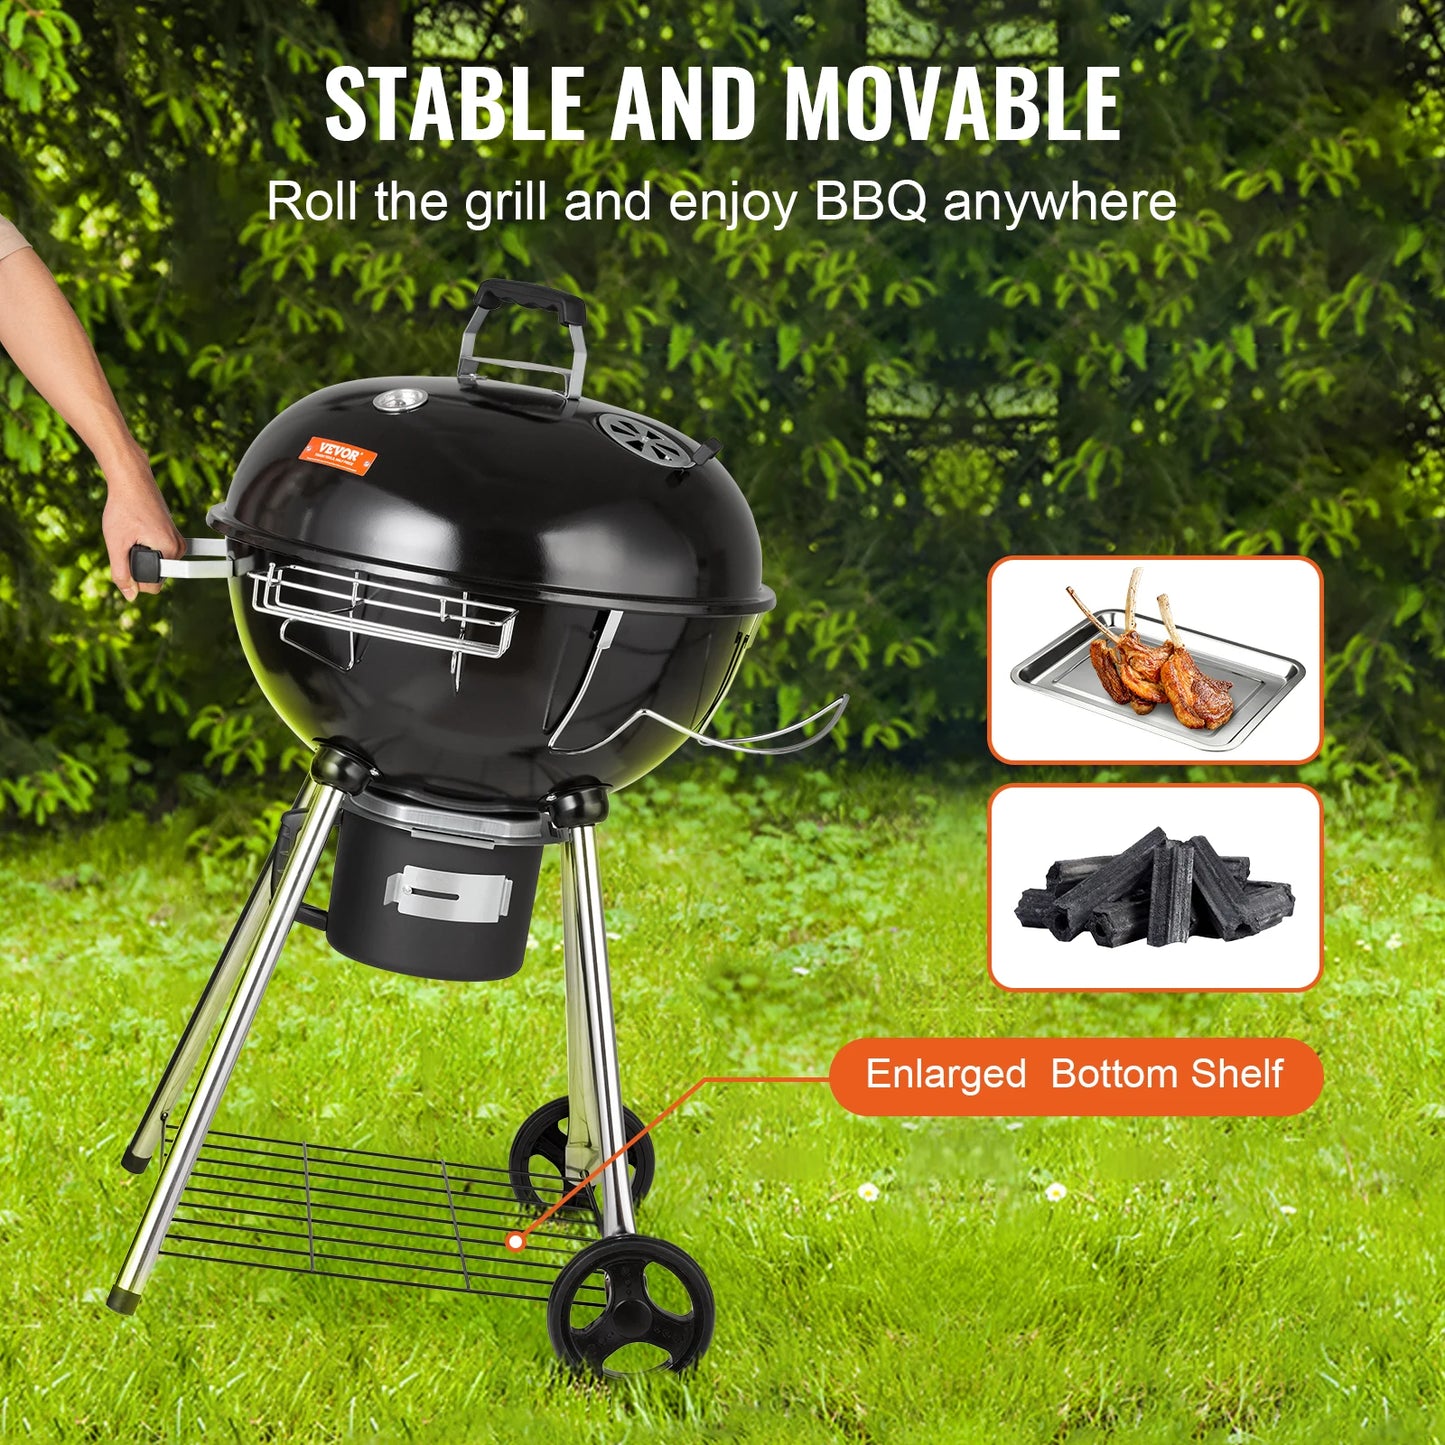 VEVOR 22inch BBQ Portable Grill Apple Shape Charcoal Heating Stove